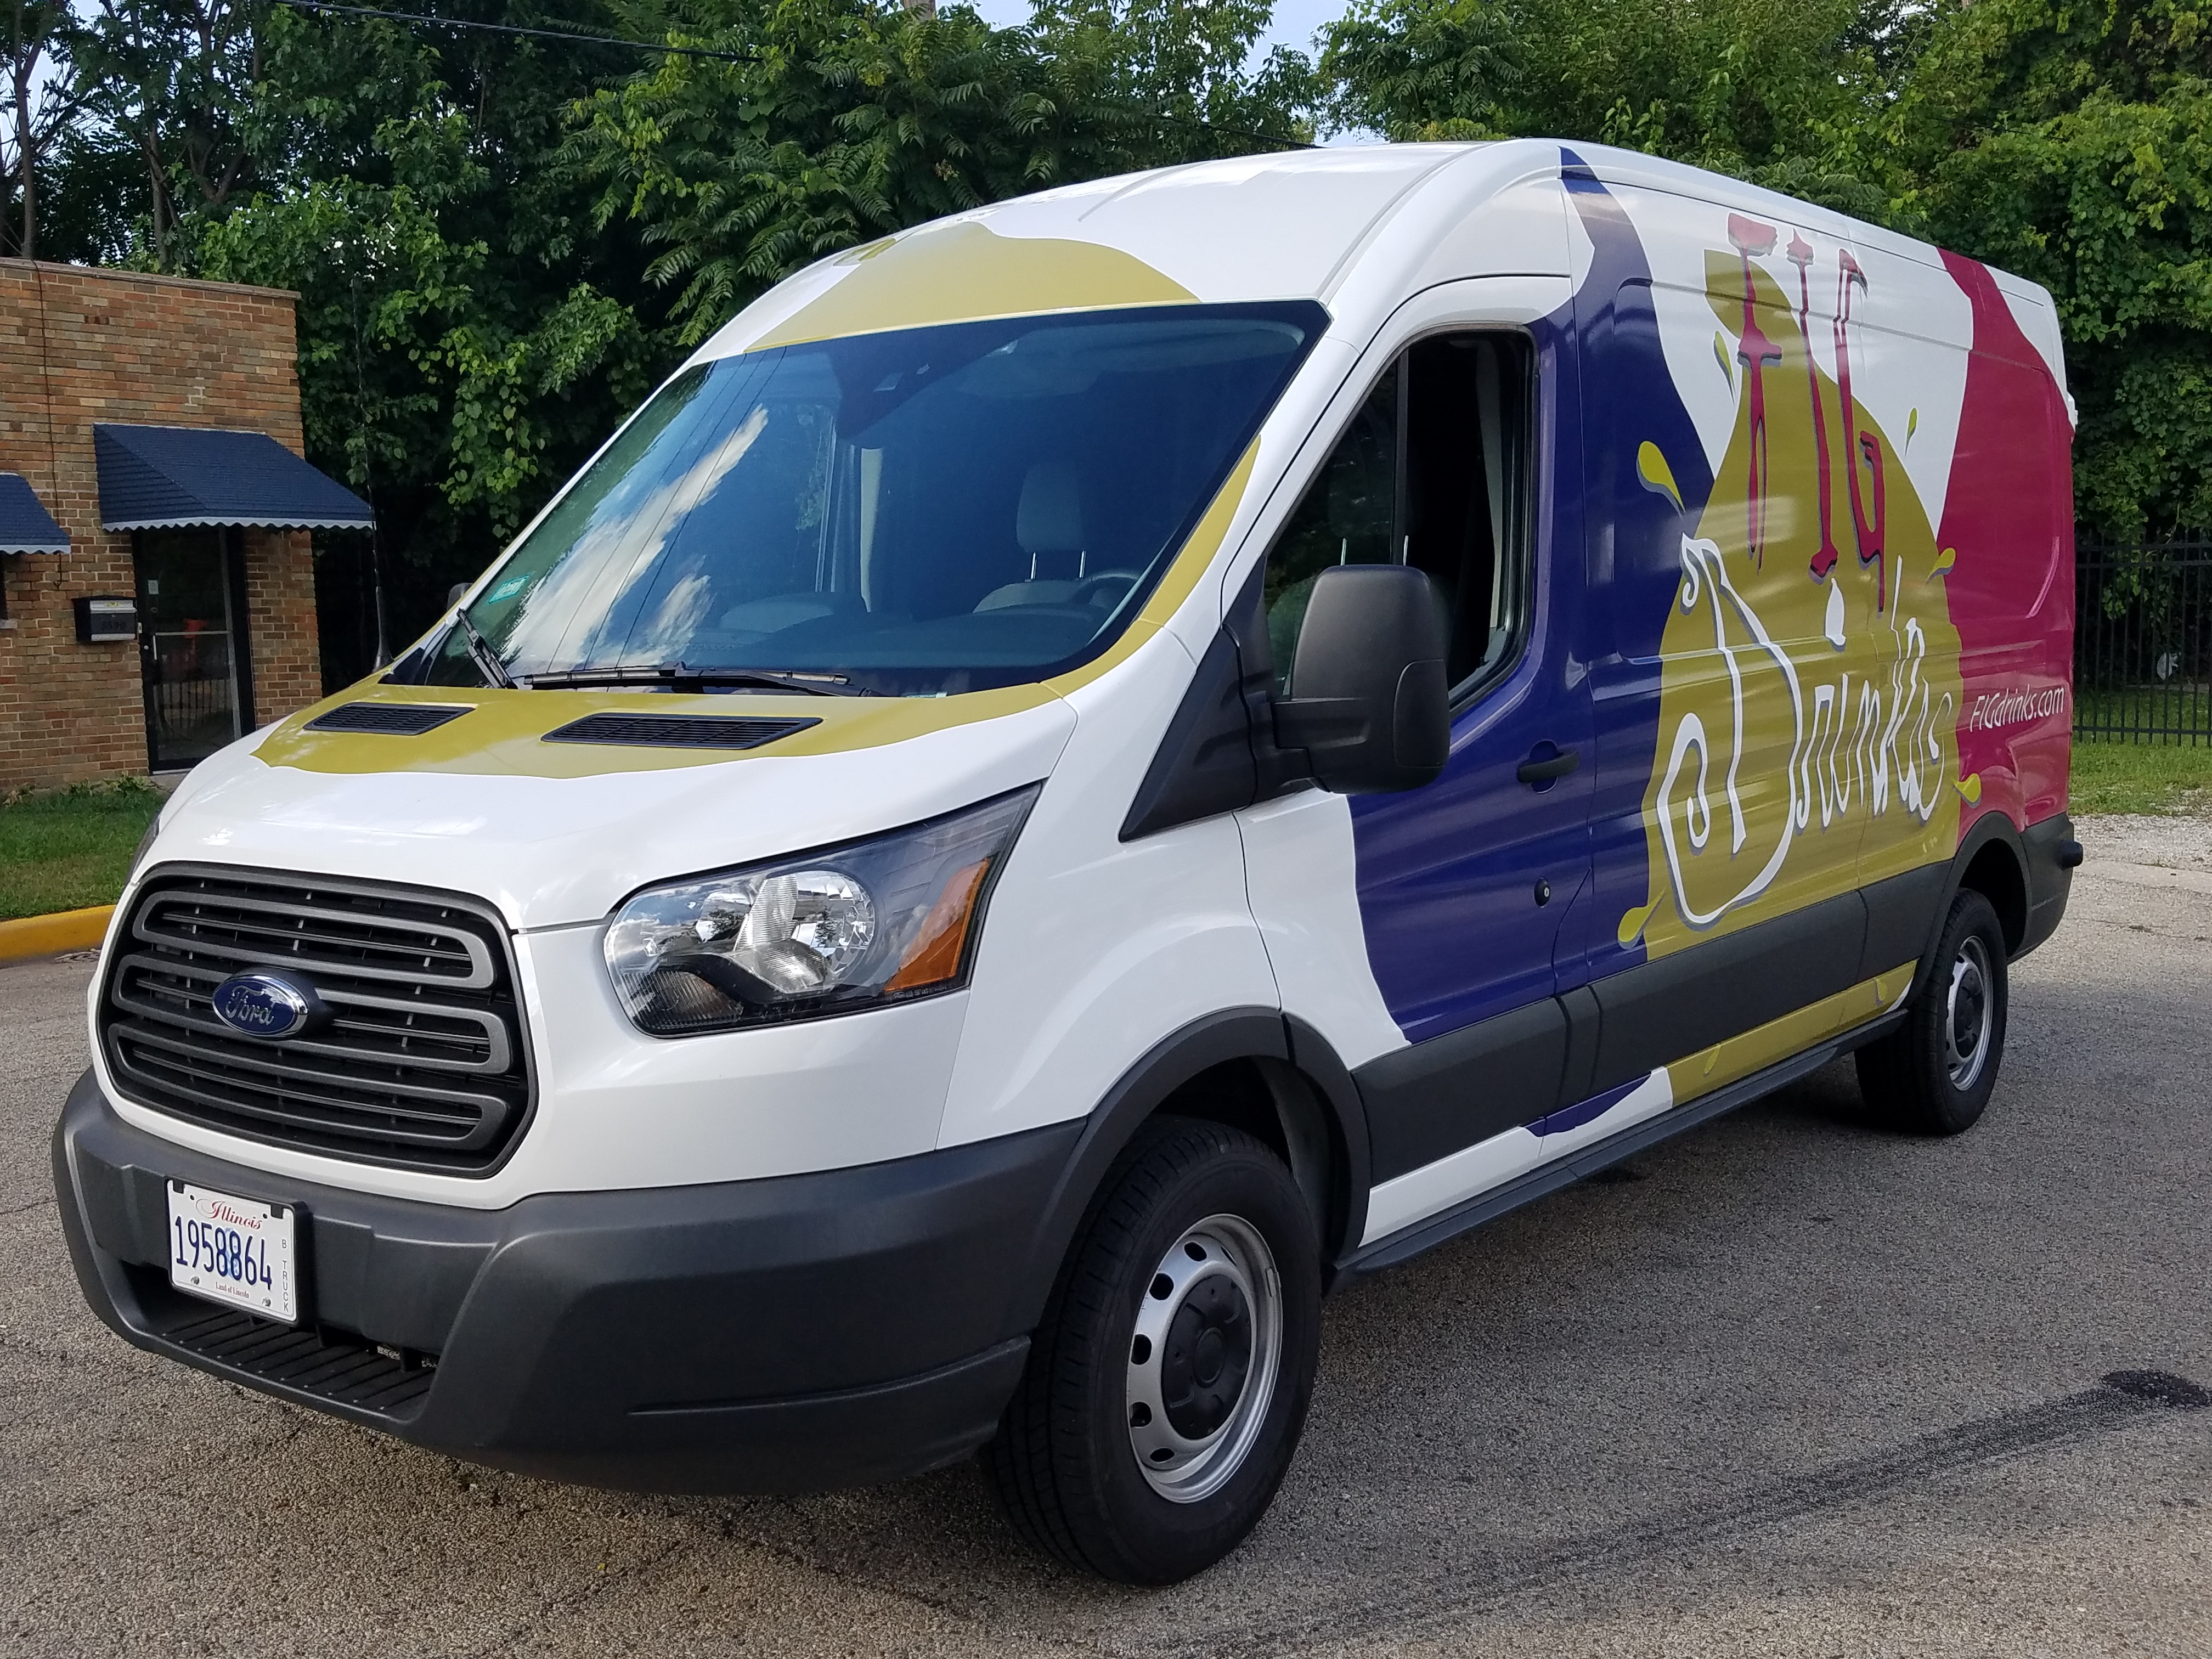 A white van with a vehicle wrap for Fig Drinks